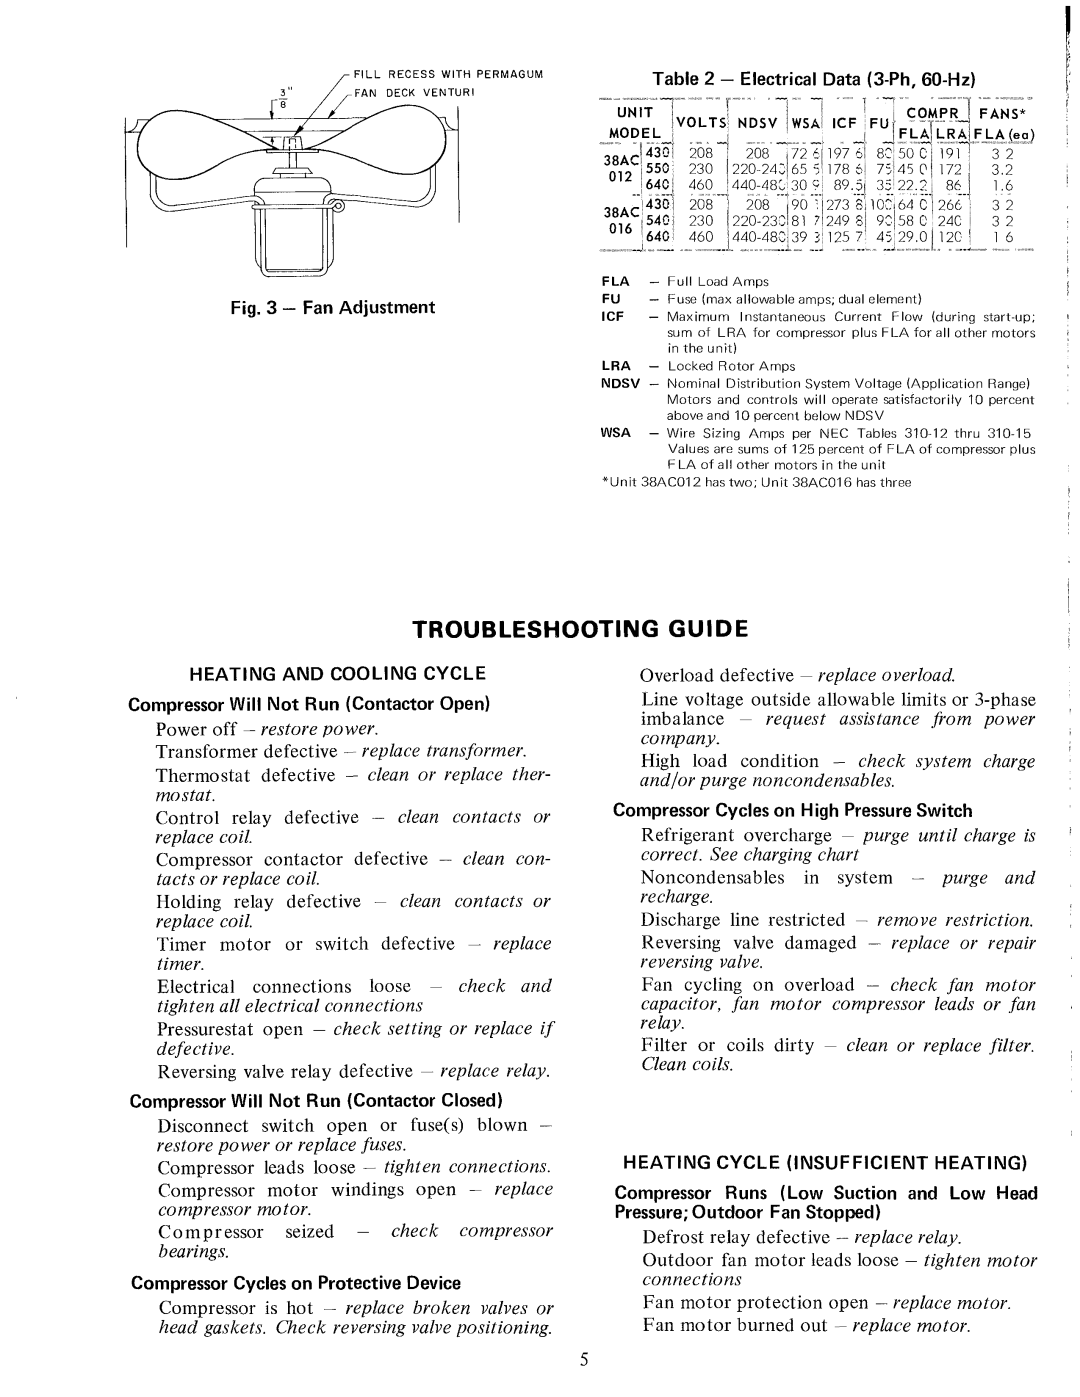 Carrier 38AC manual 